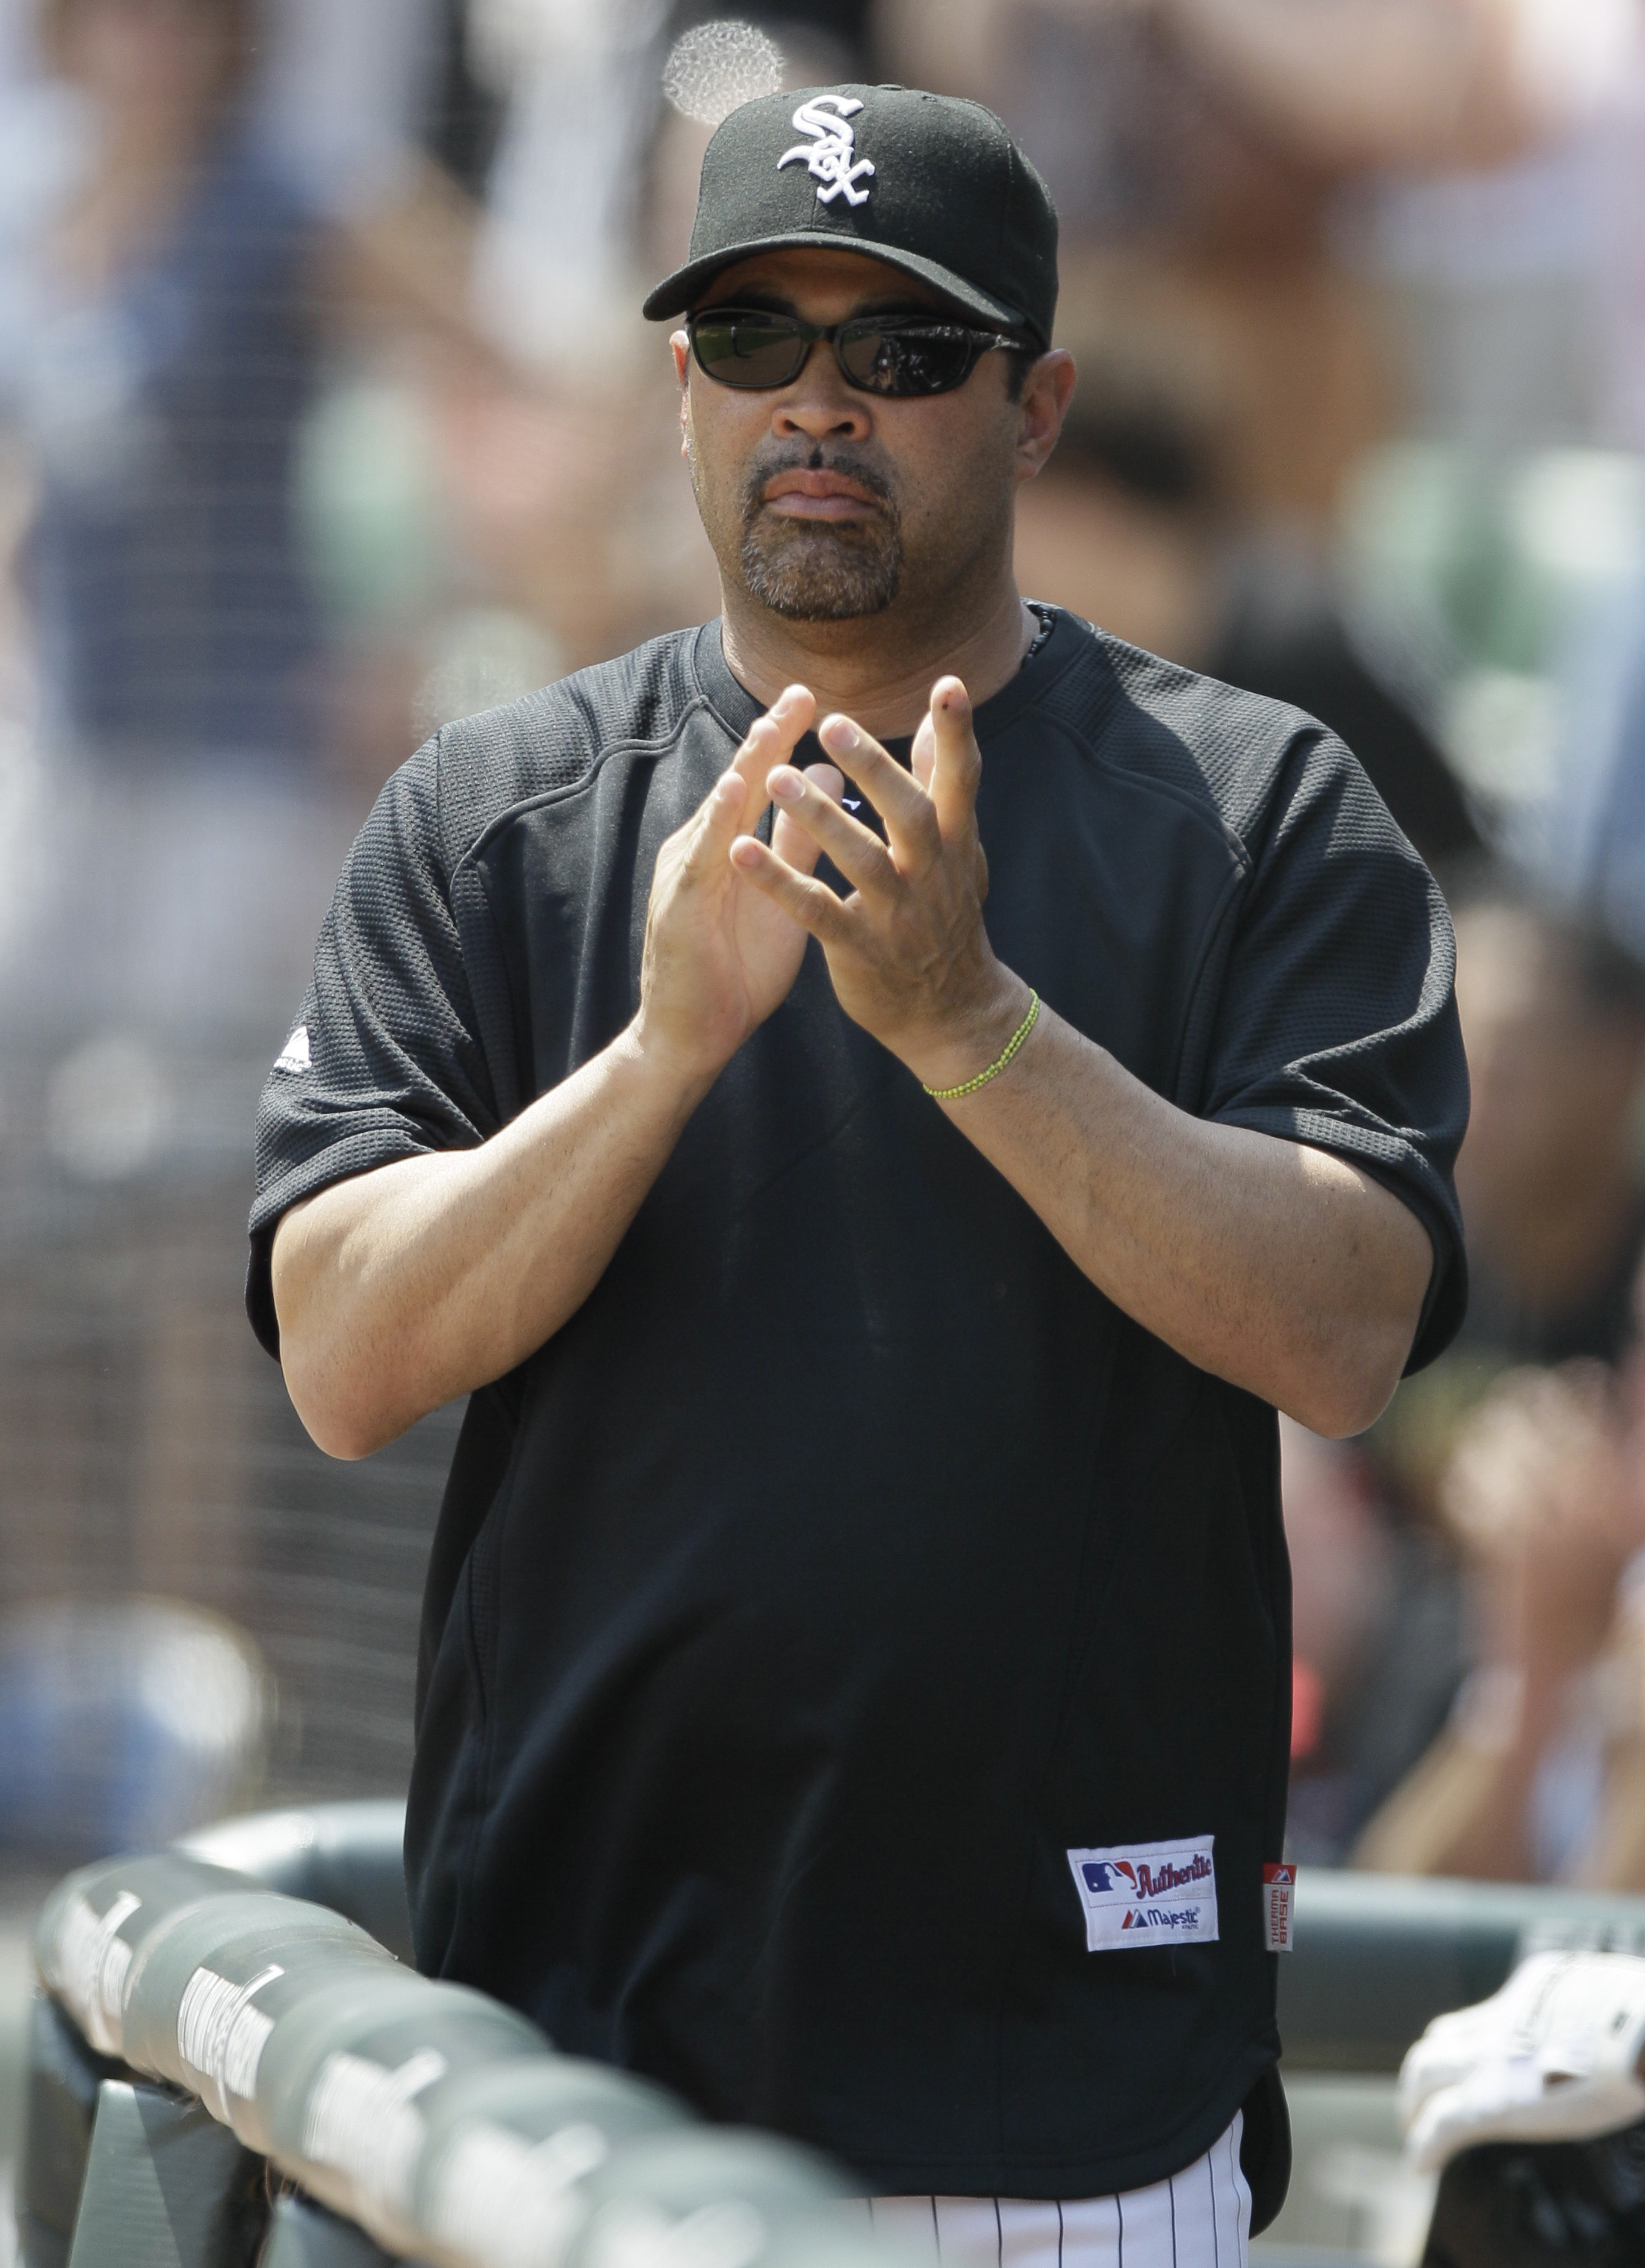 Chicago White Sox: Ozzie Guillen's career as a player